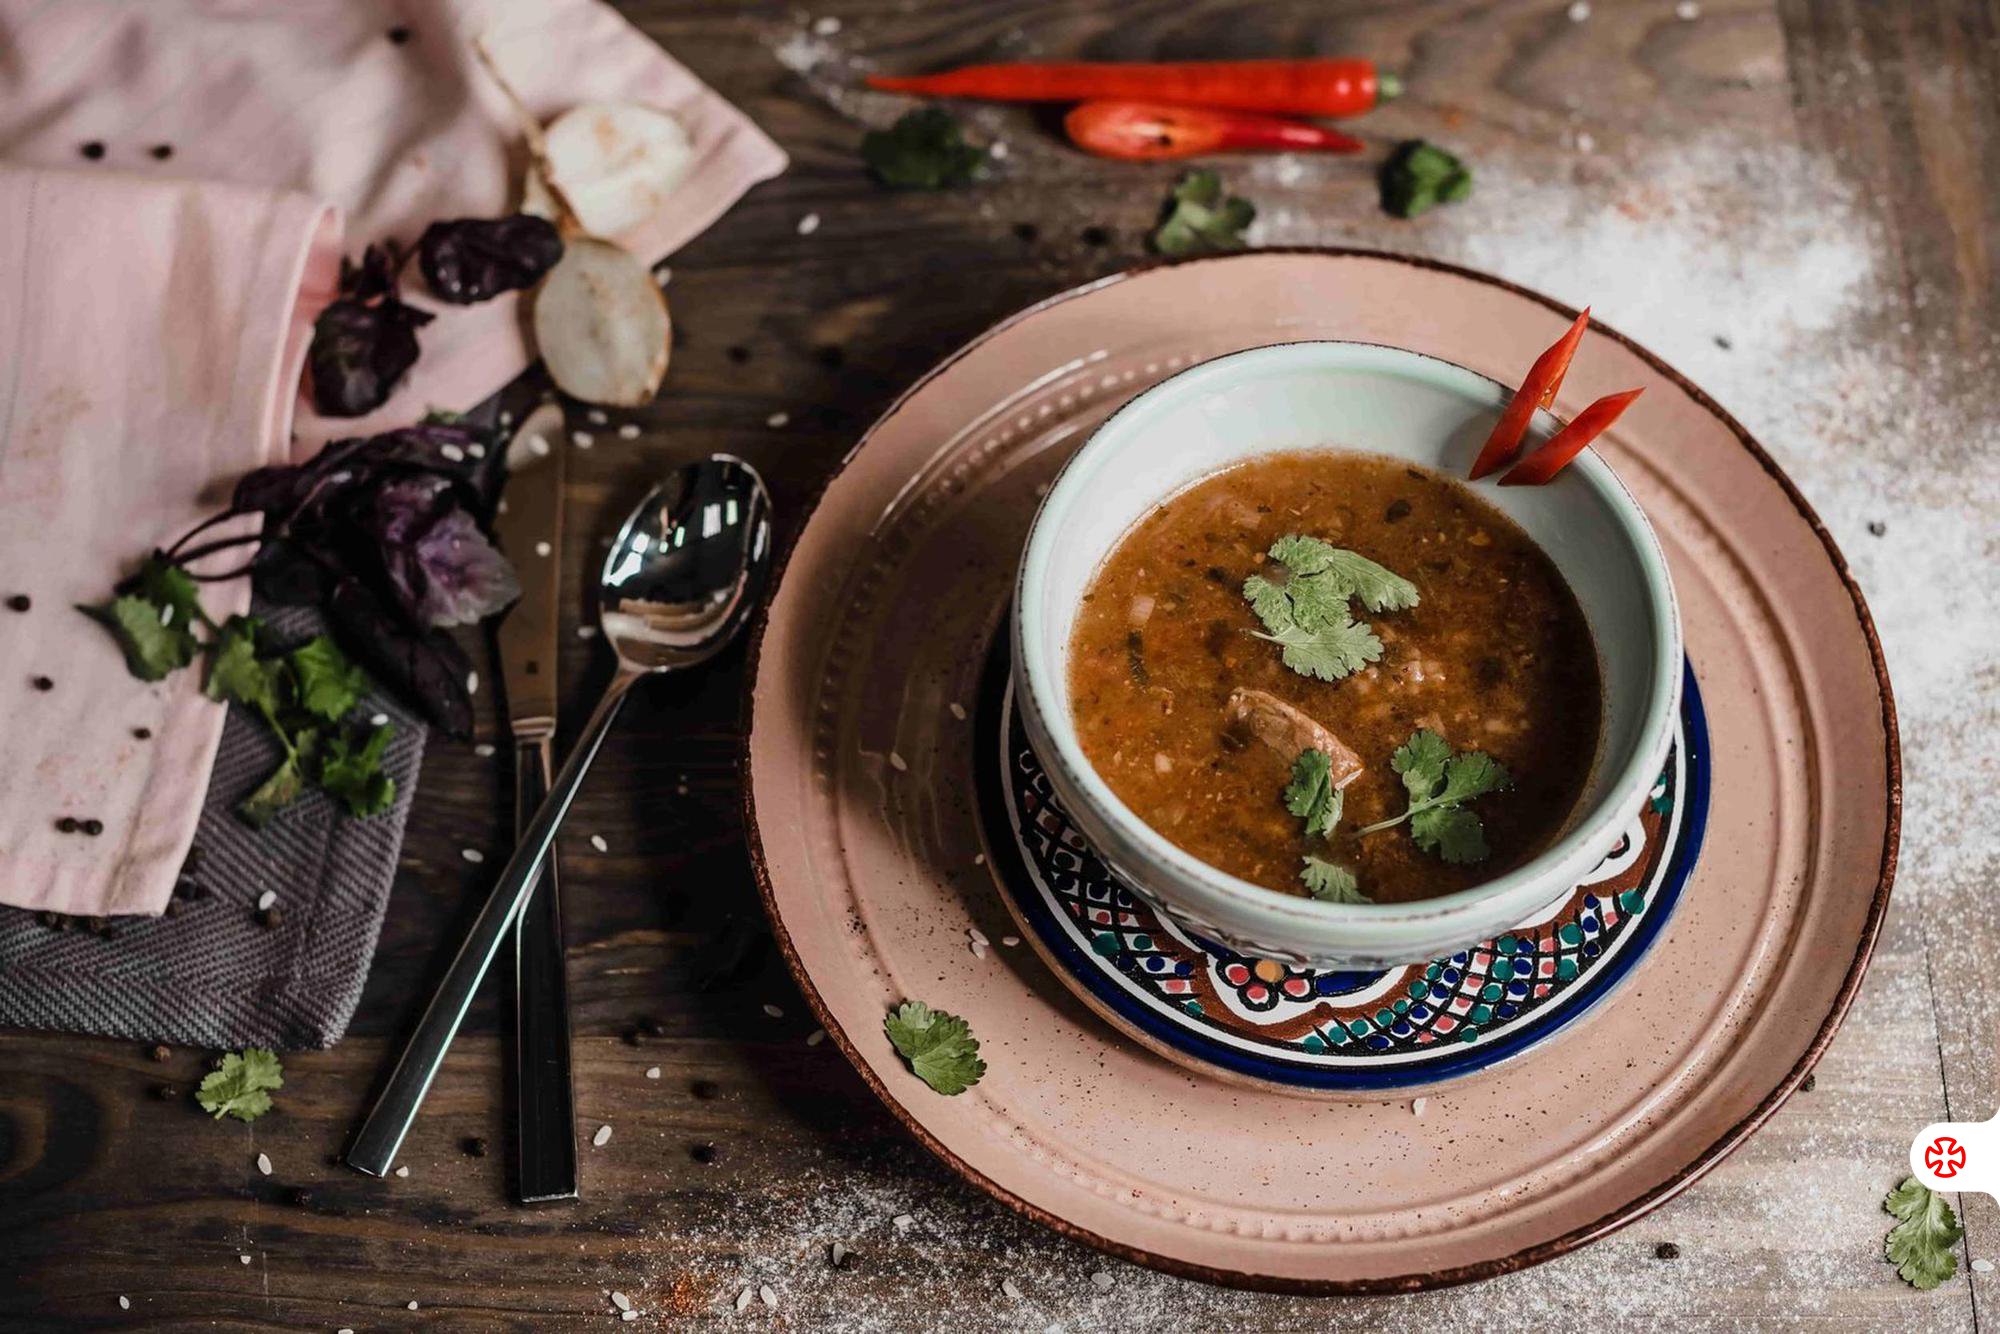 Georgian Kharcho soup in a decorated bowl, topped with cilantro and chili